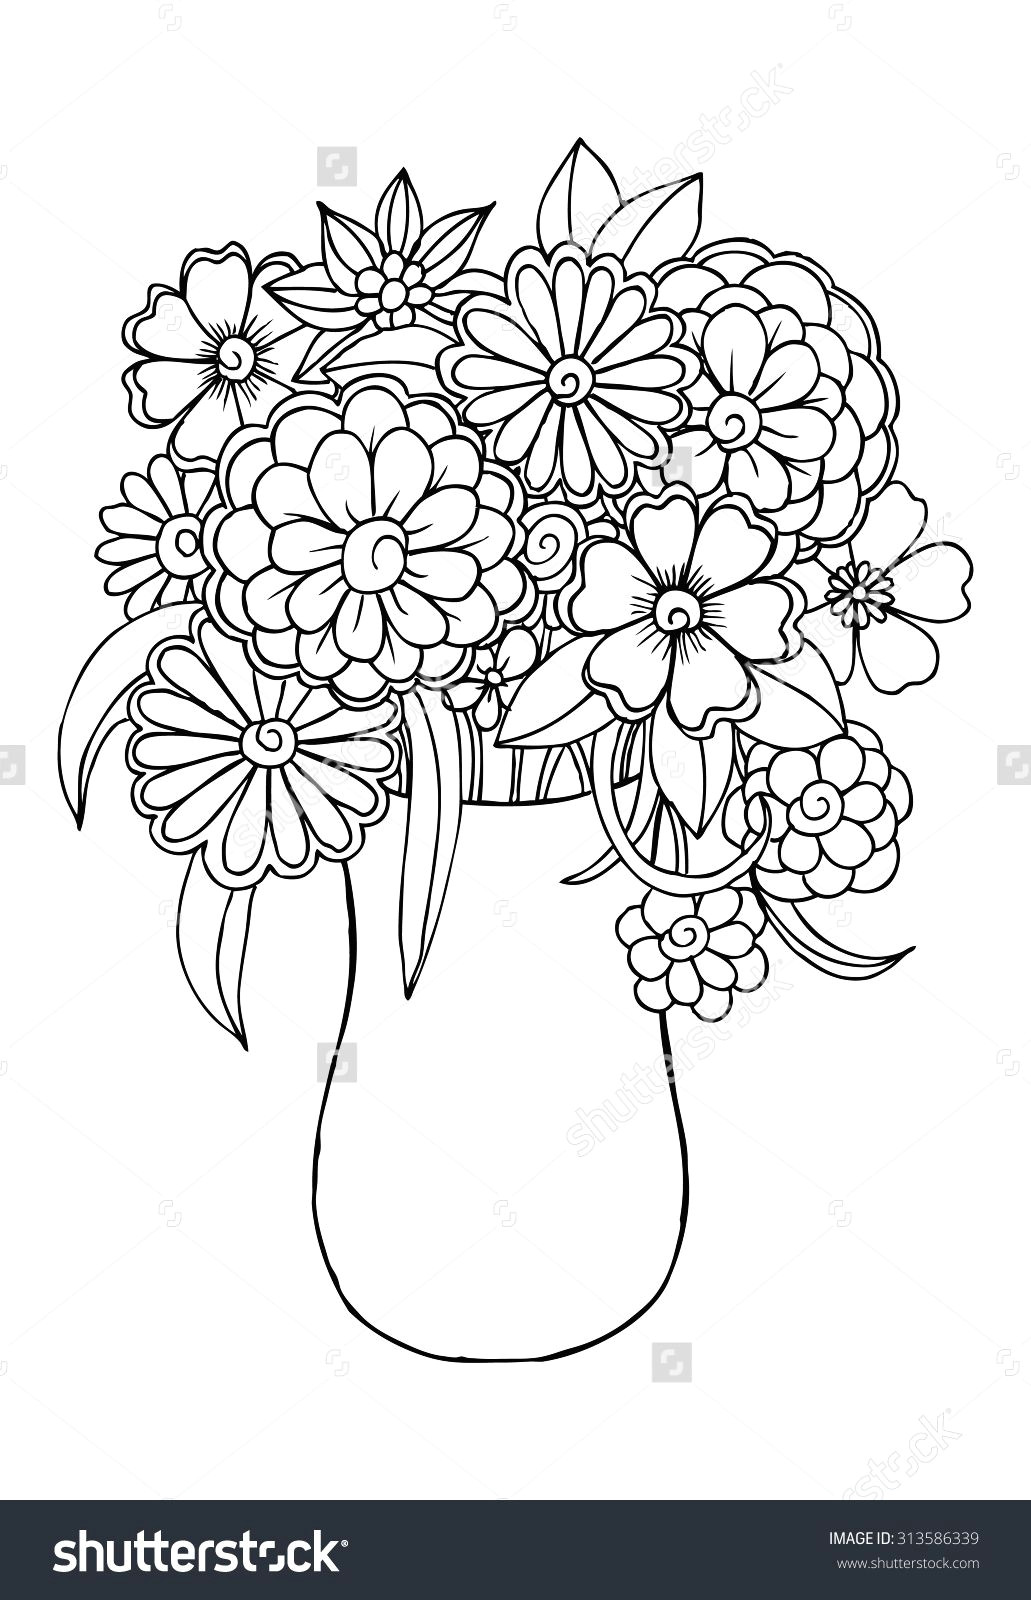 Drawing Ideas Vase Vector Bouquet Of Flowers In A Vase Art Draw Flowers and Plants